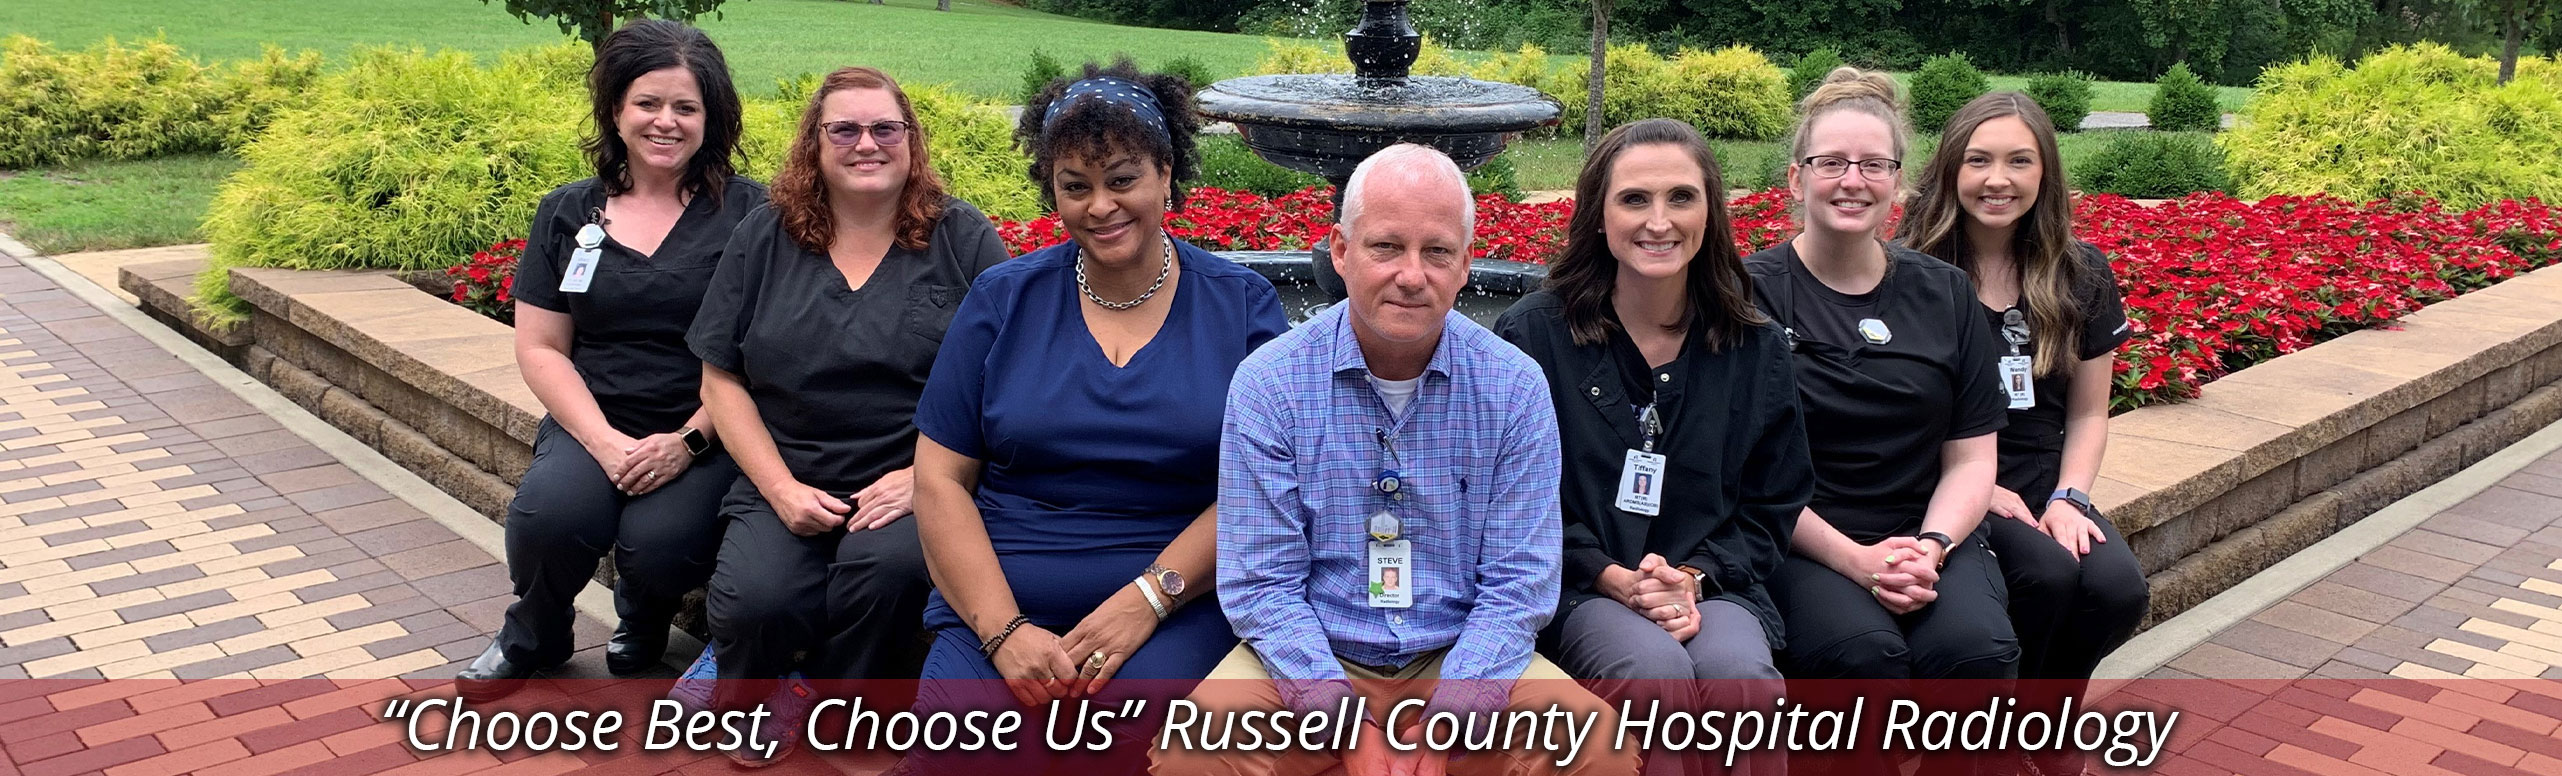 Banner Picture of our Radiology Staff sitting outside in front of a water foundation that is surrounded by beautiful flowers. There is one male and  six females. Banner says:
"Choose Best, Choose Us" Russell County Hospital Radiology